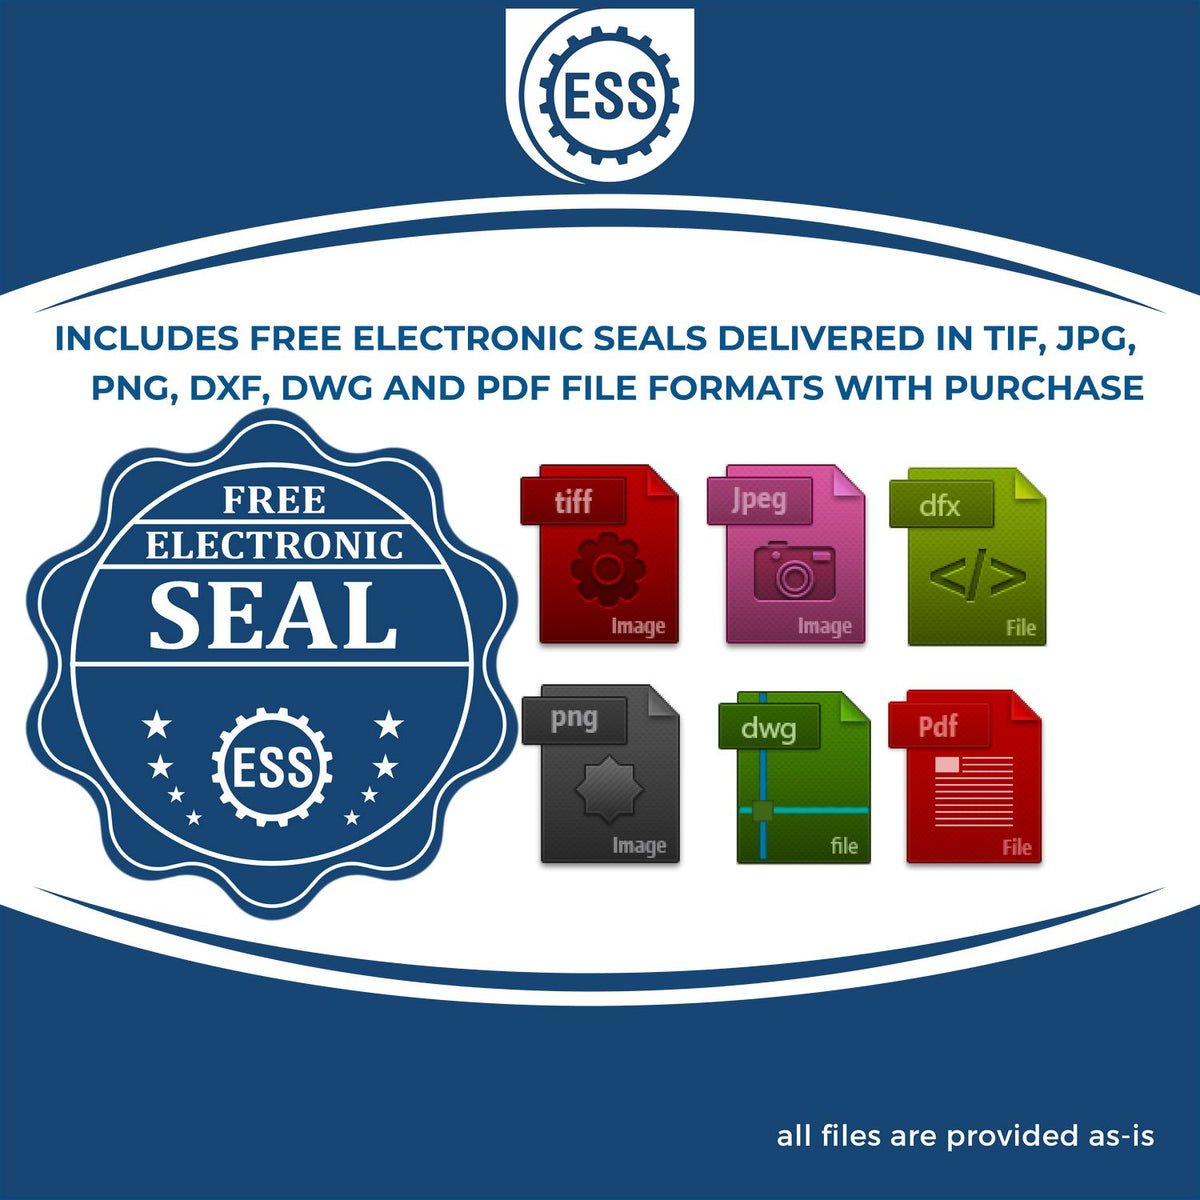 An infographic for the free electronic seal for the Heavy Duty Cast Iron Utah Architect Embosser illustrating the different file type icons such as DXF, DWG, TIF, JPG and PNG.